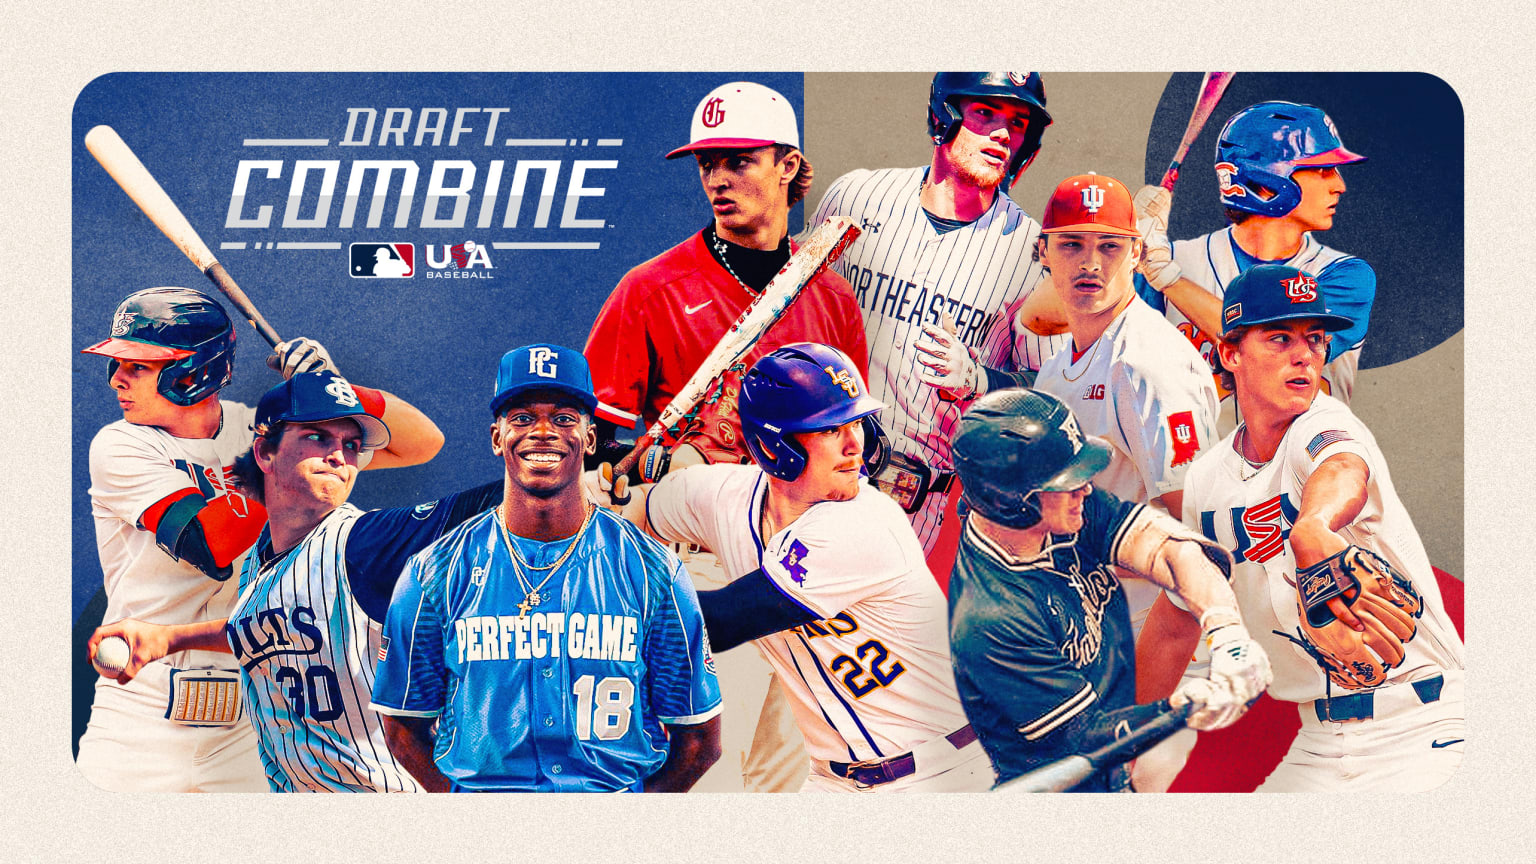 Prospects to watch at this week's MLB Draft Combine